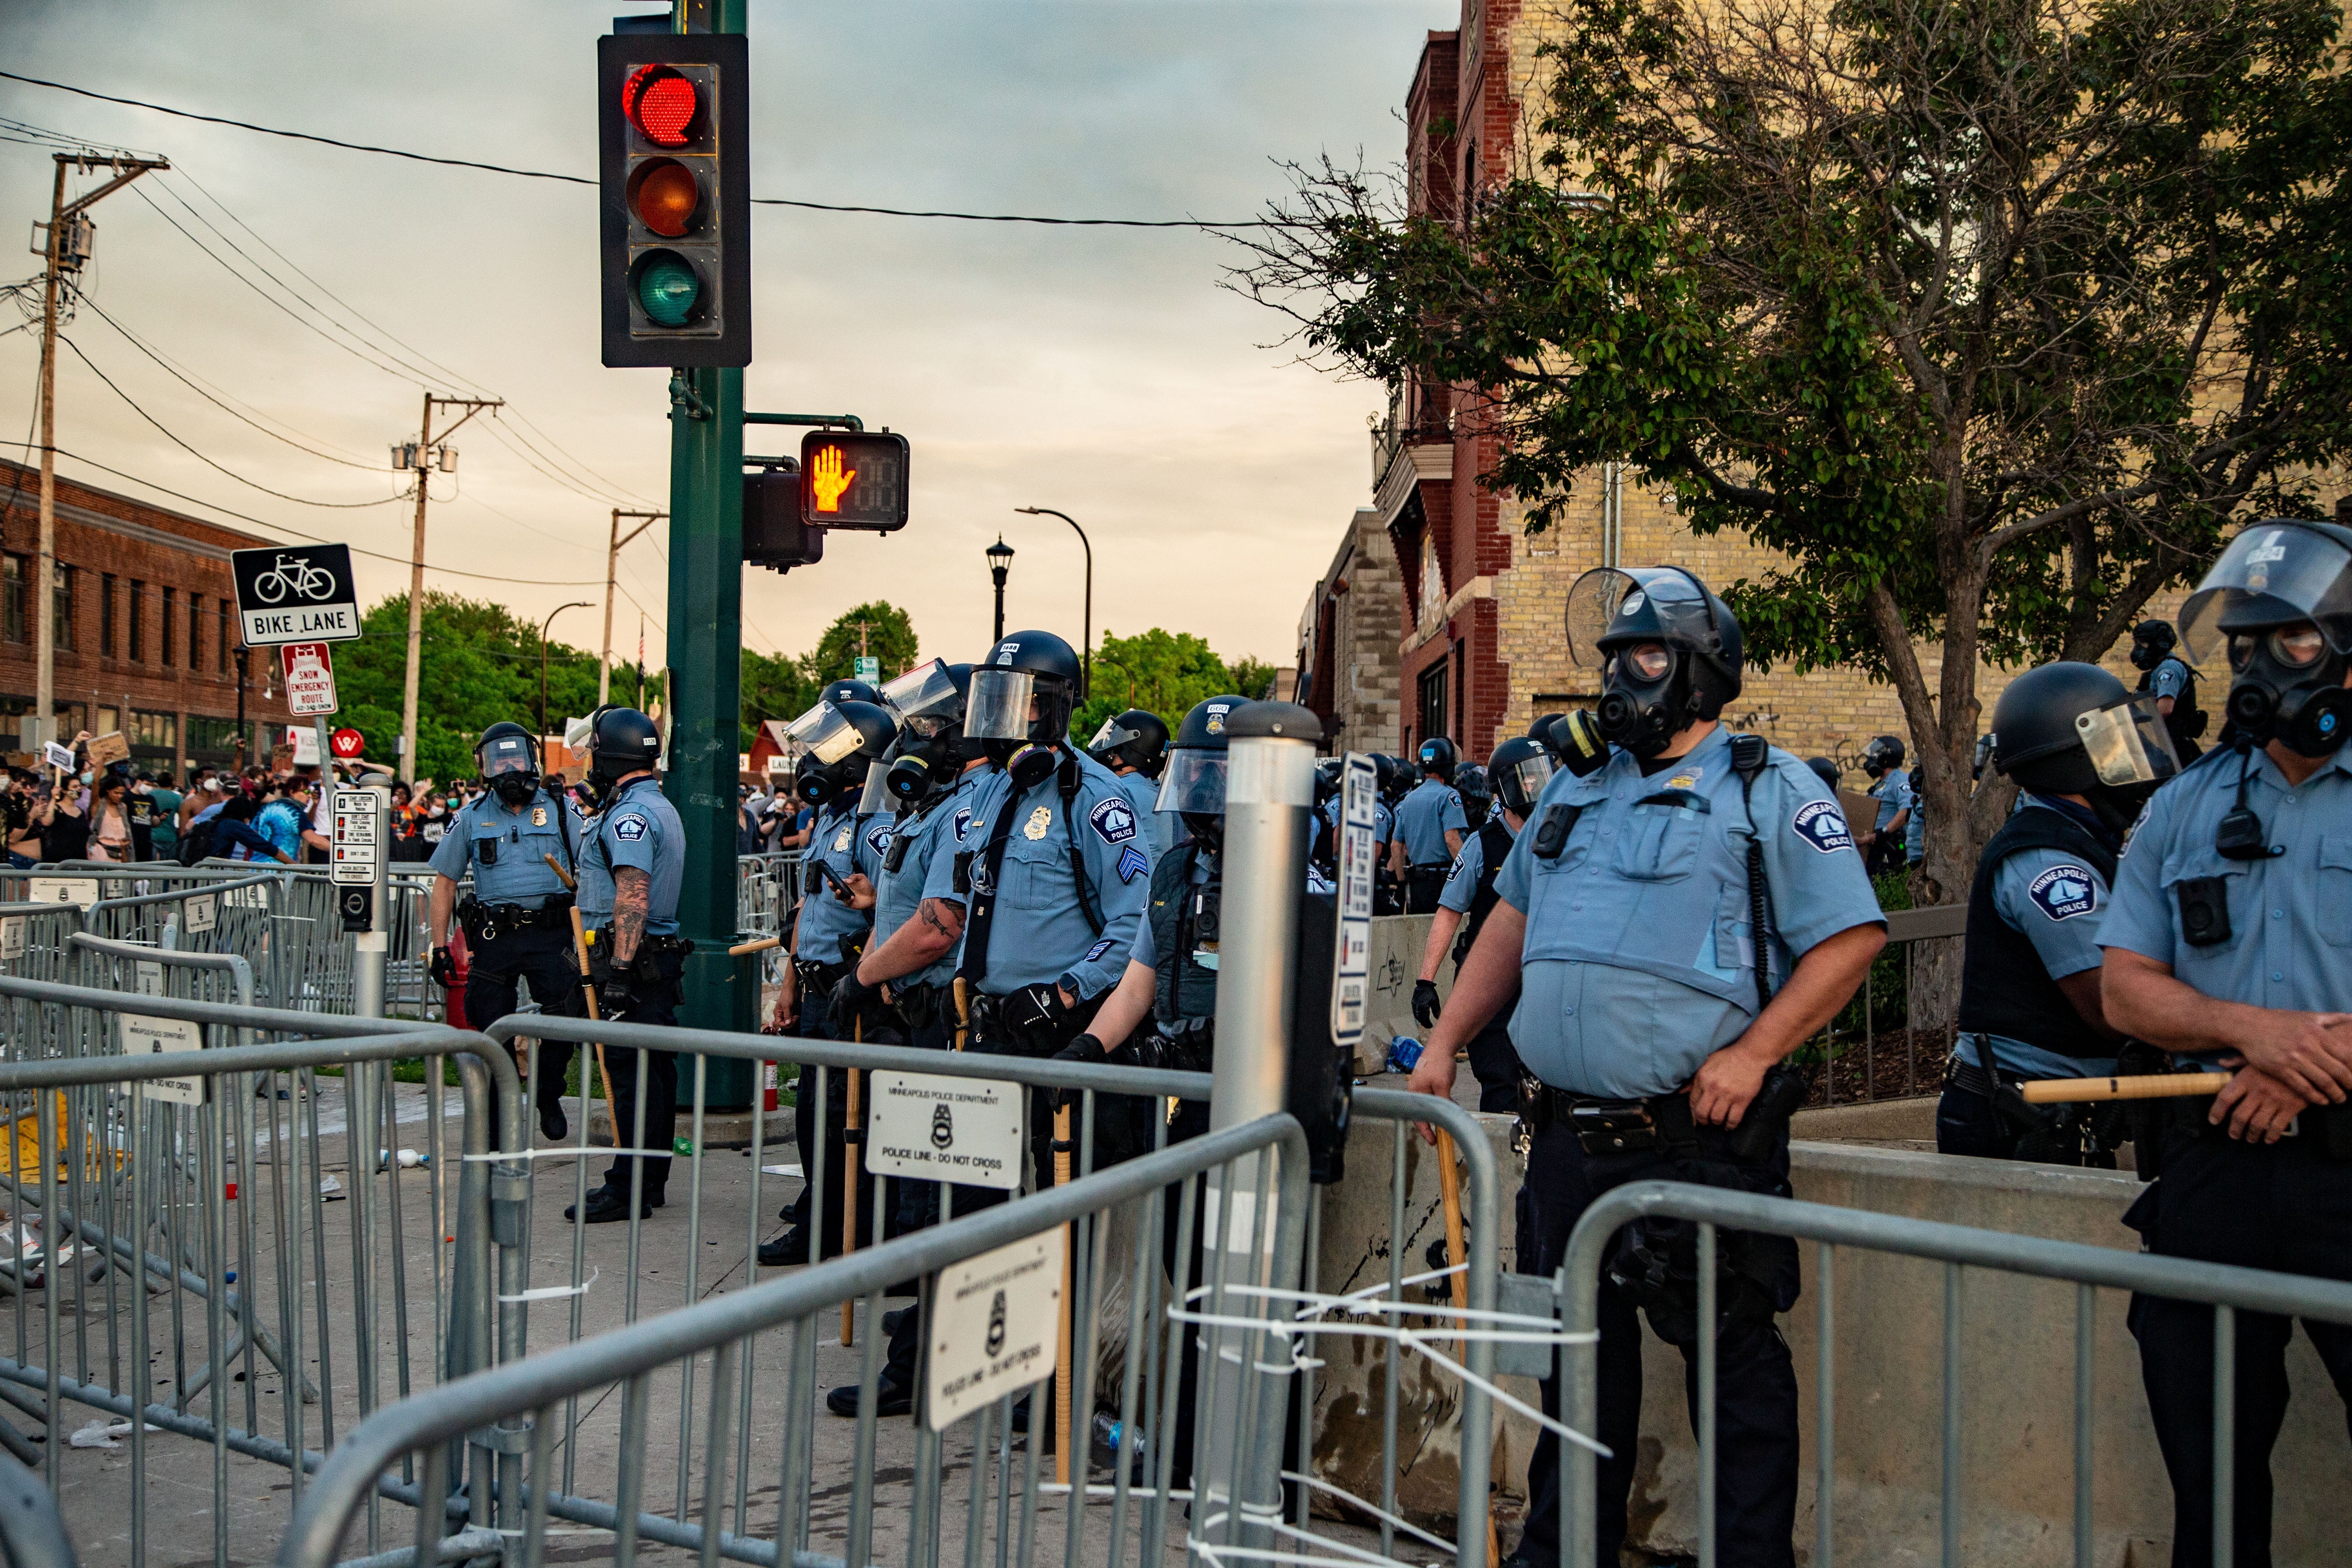 Police in masks stand near barricades and traffic lights.